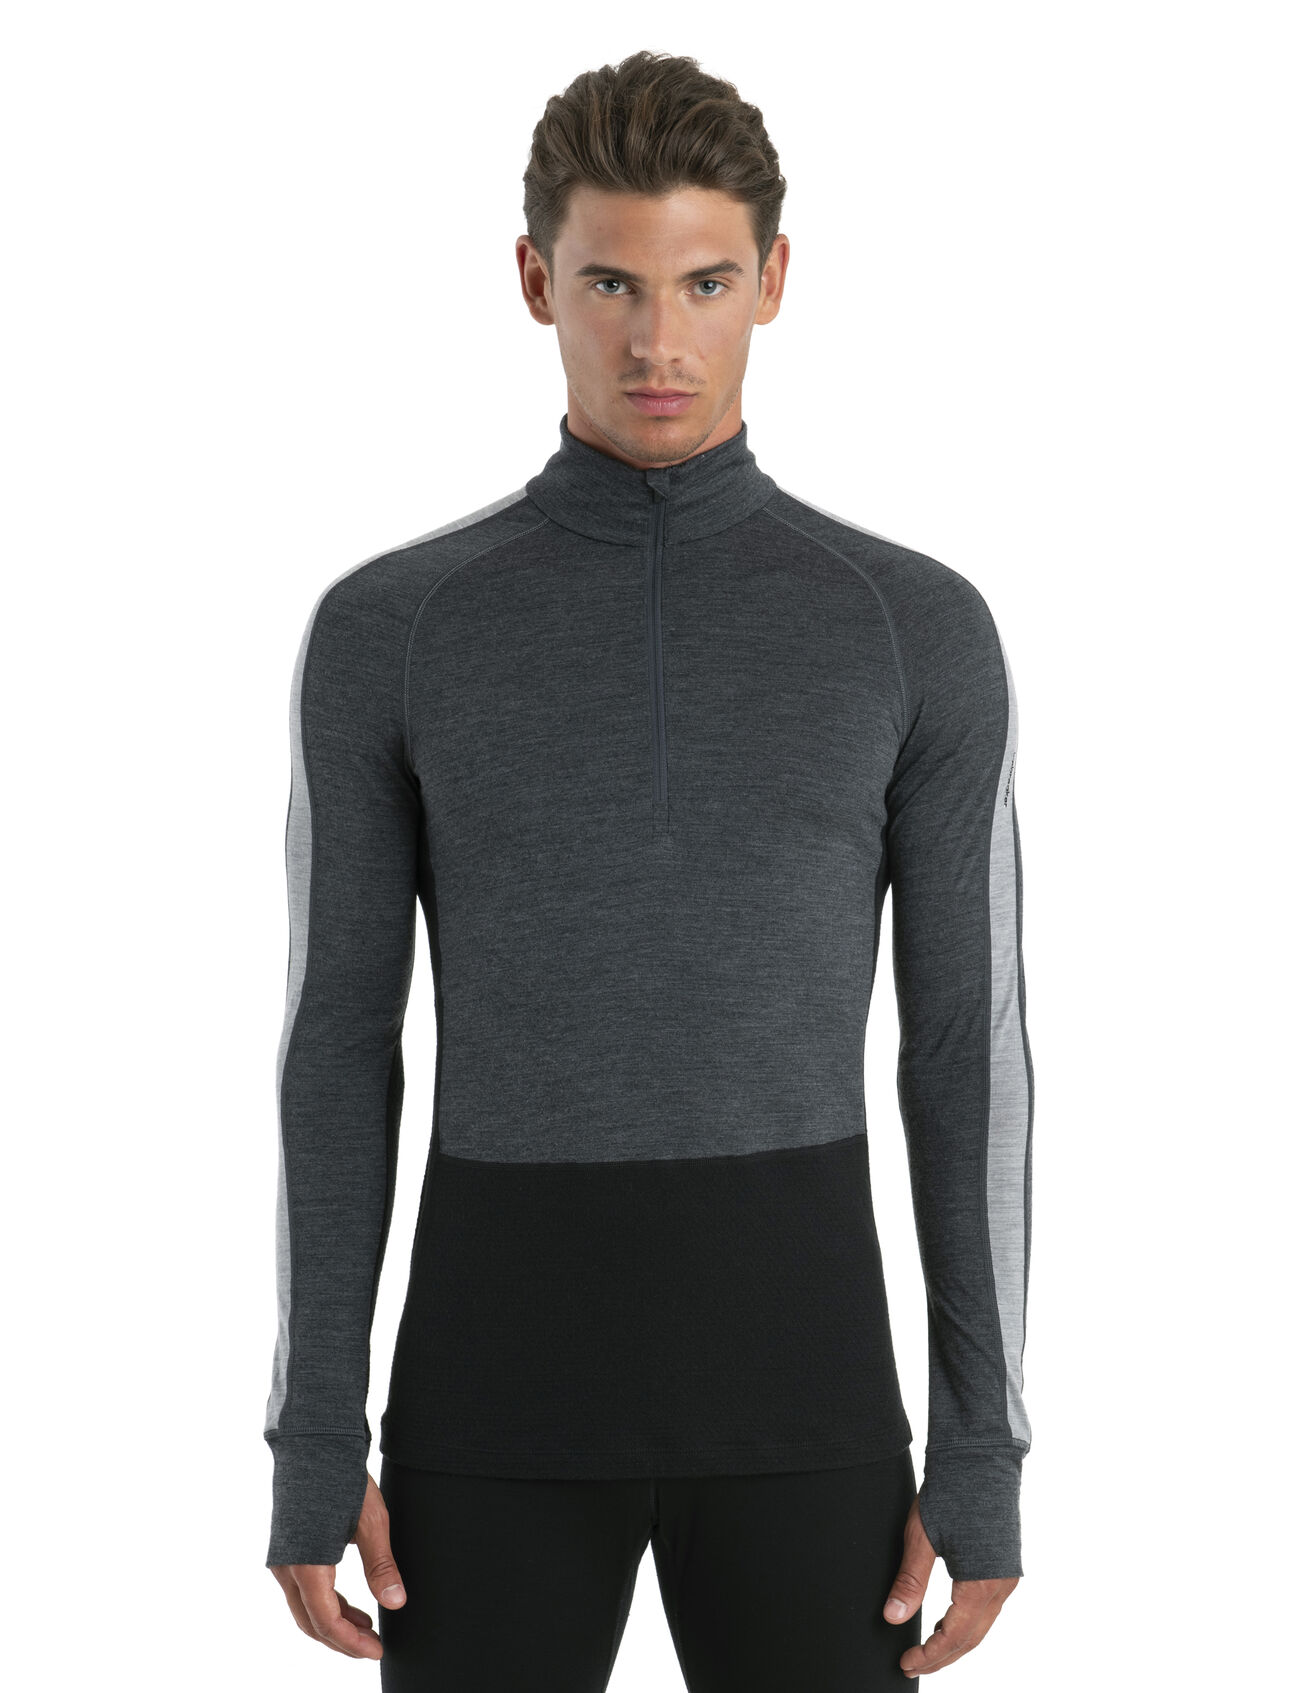 Mens 200 ZoneKnit™ Merino Long Sleeve Half Zip Thermal Top A midweight merino base layer top designed to help regulate temperature during high-intensity activity, the 200 ZoneKnit™ Long Sleeve Half Zip features 100% pure and natural merino wool.